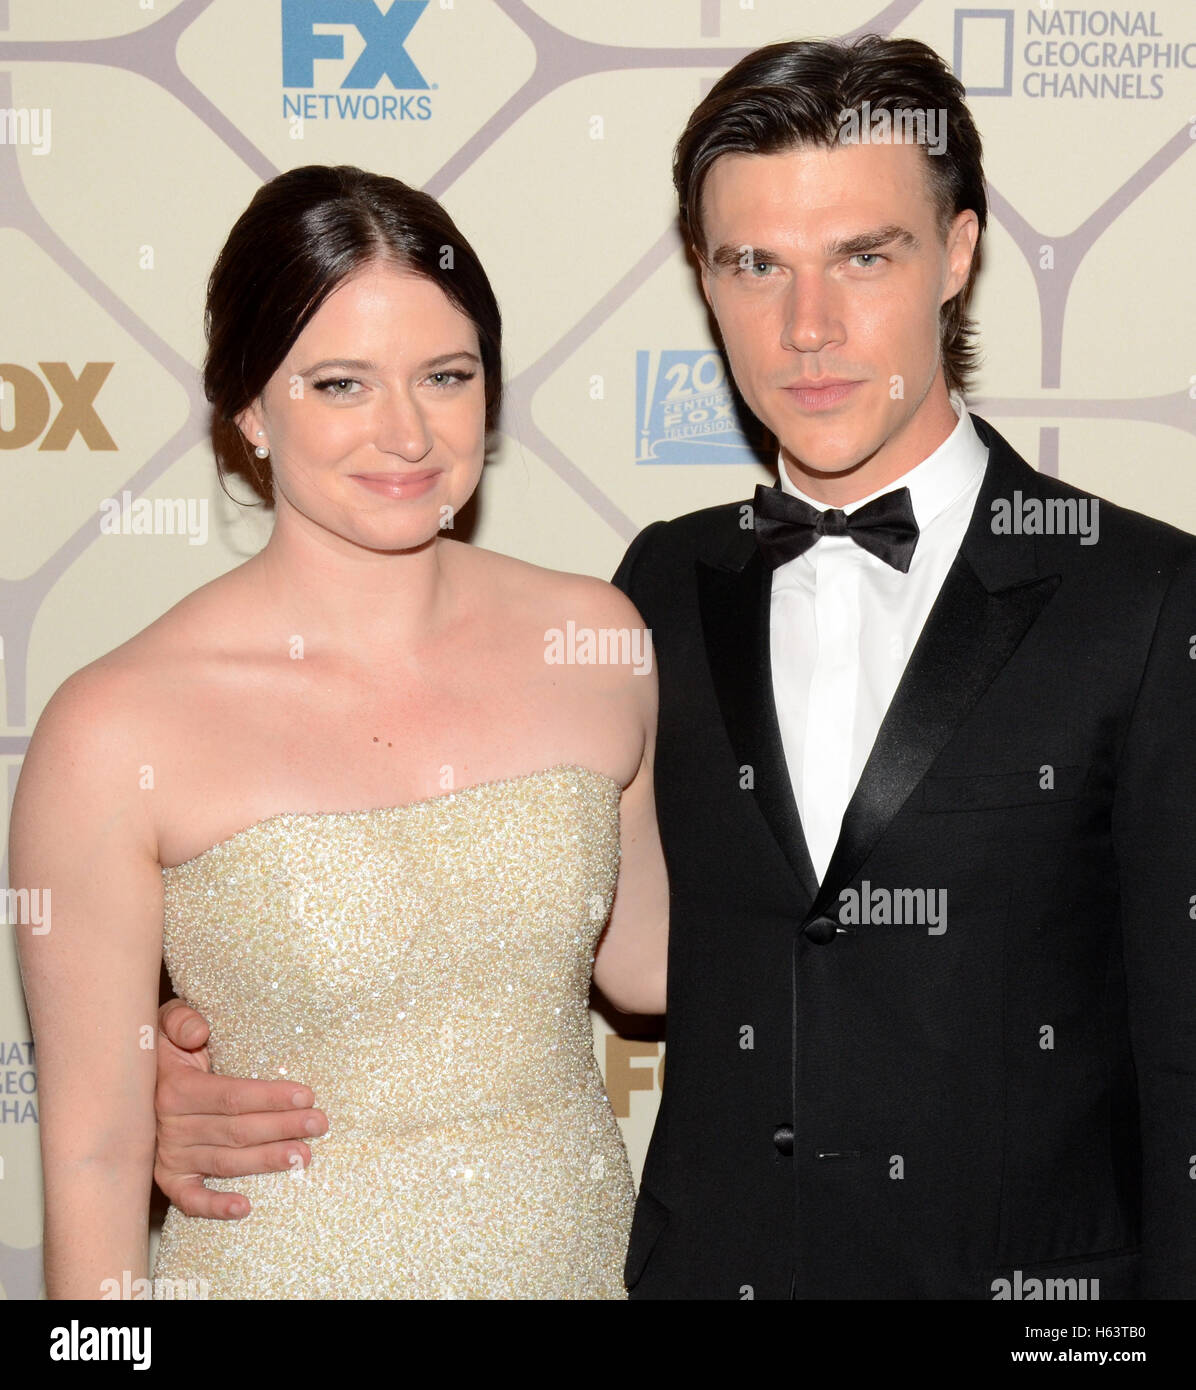 Actor Finn Wittrock (r) and Sarah Roberts attend the 67th Primetime Emmy Awards Fox after party on September 20, 2015 in Los Angeles, California. Stock Photo